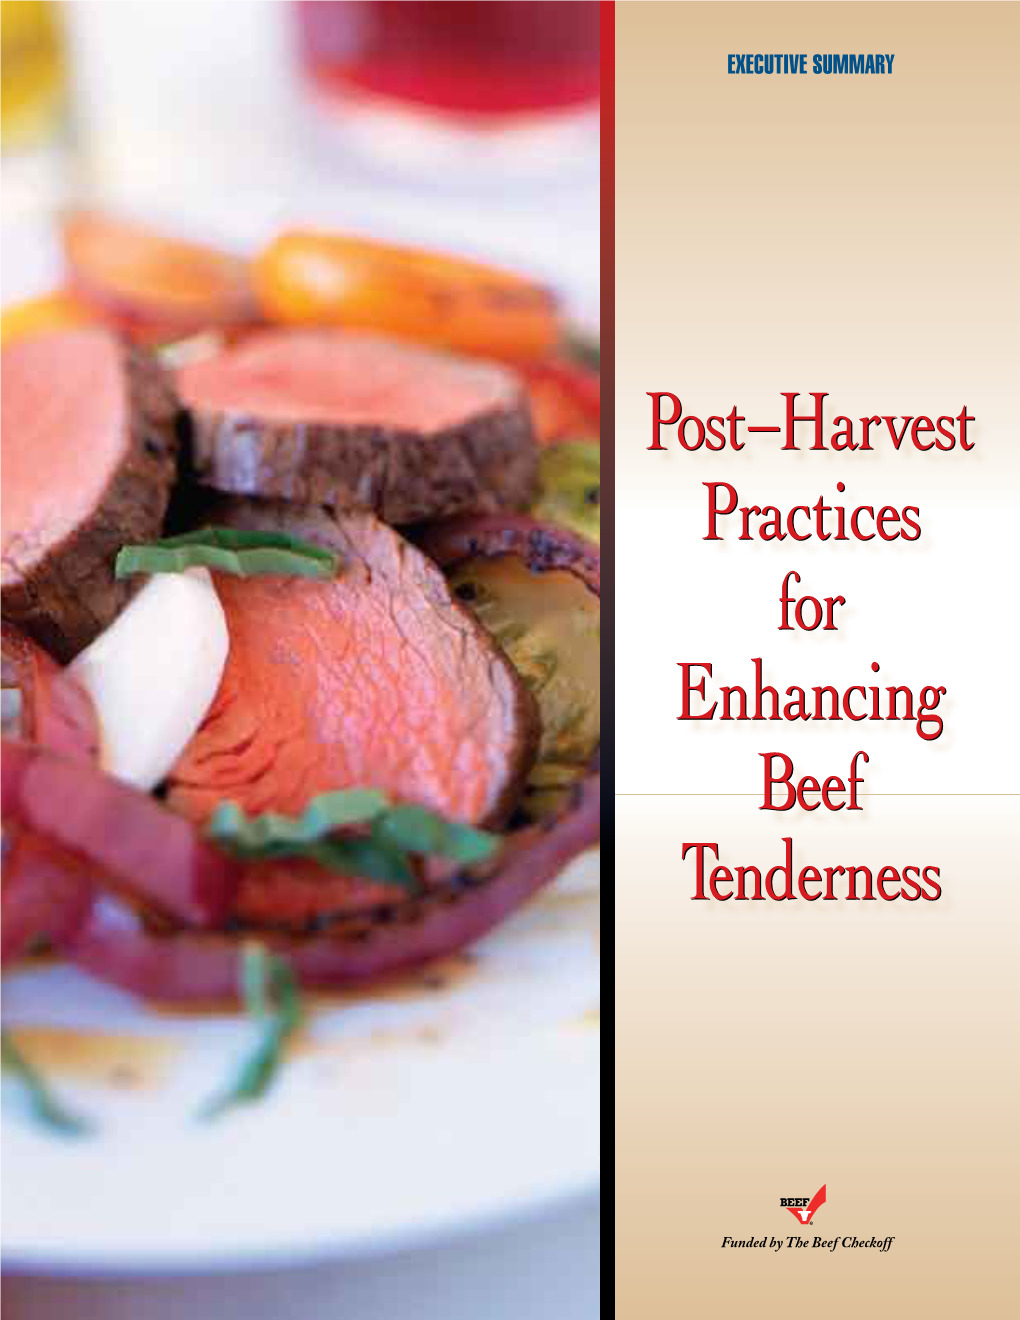 Post-Harvest Practices for Enhancing Beef Tenderness